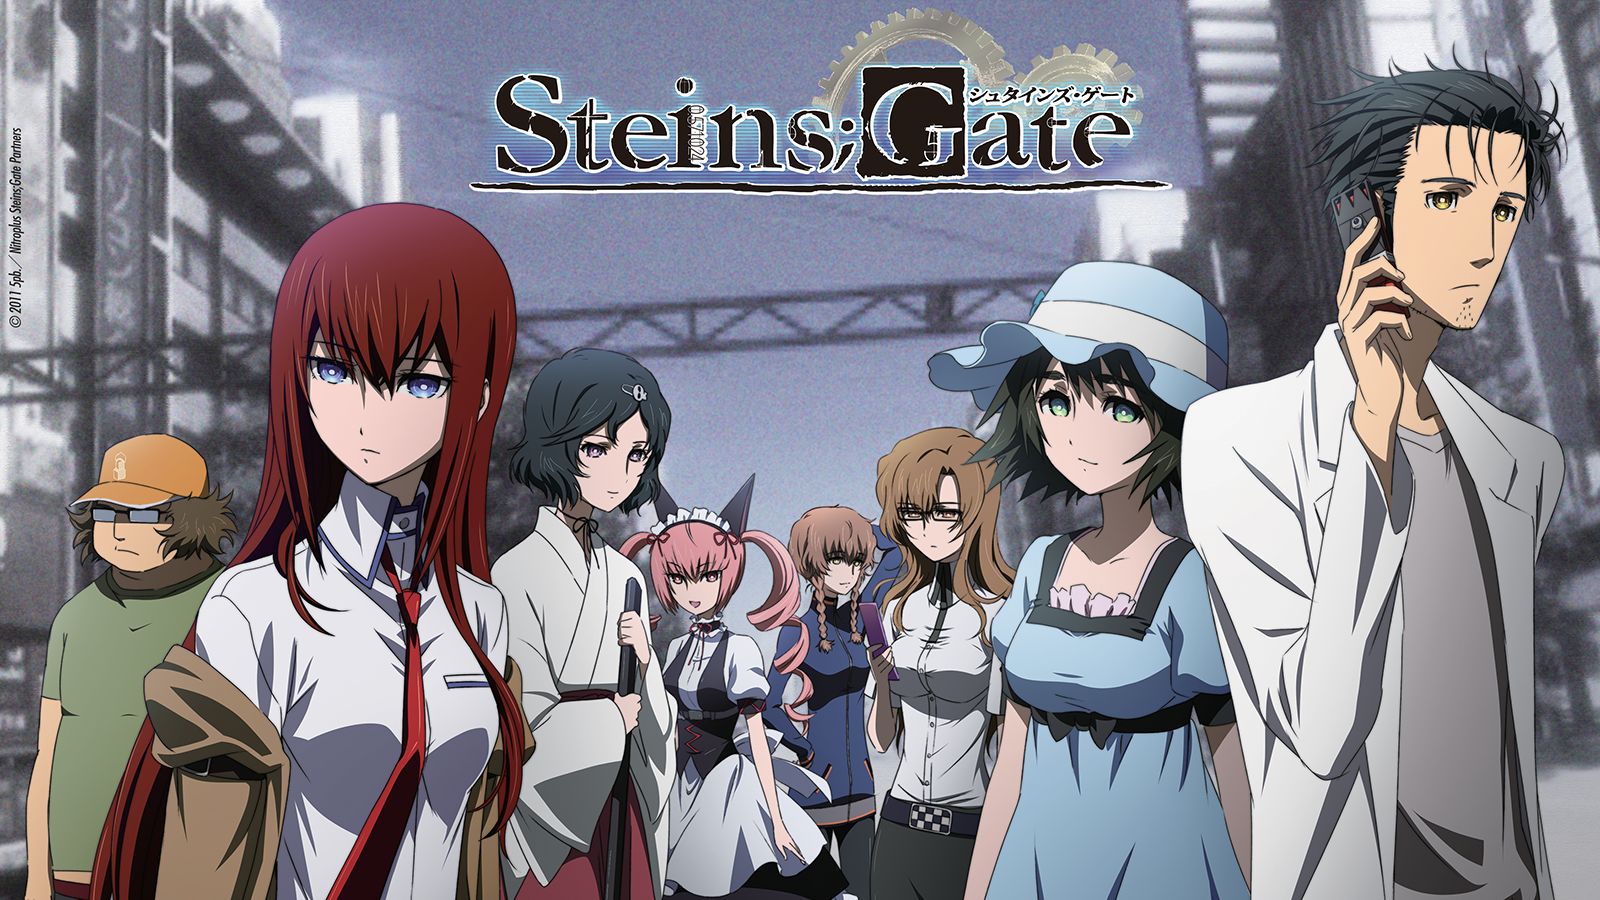 New ‘Stiens;Gate’ Anime Coming April 2018